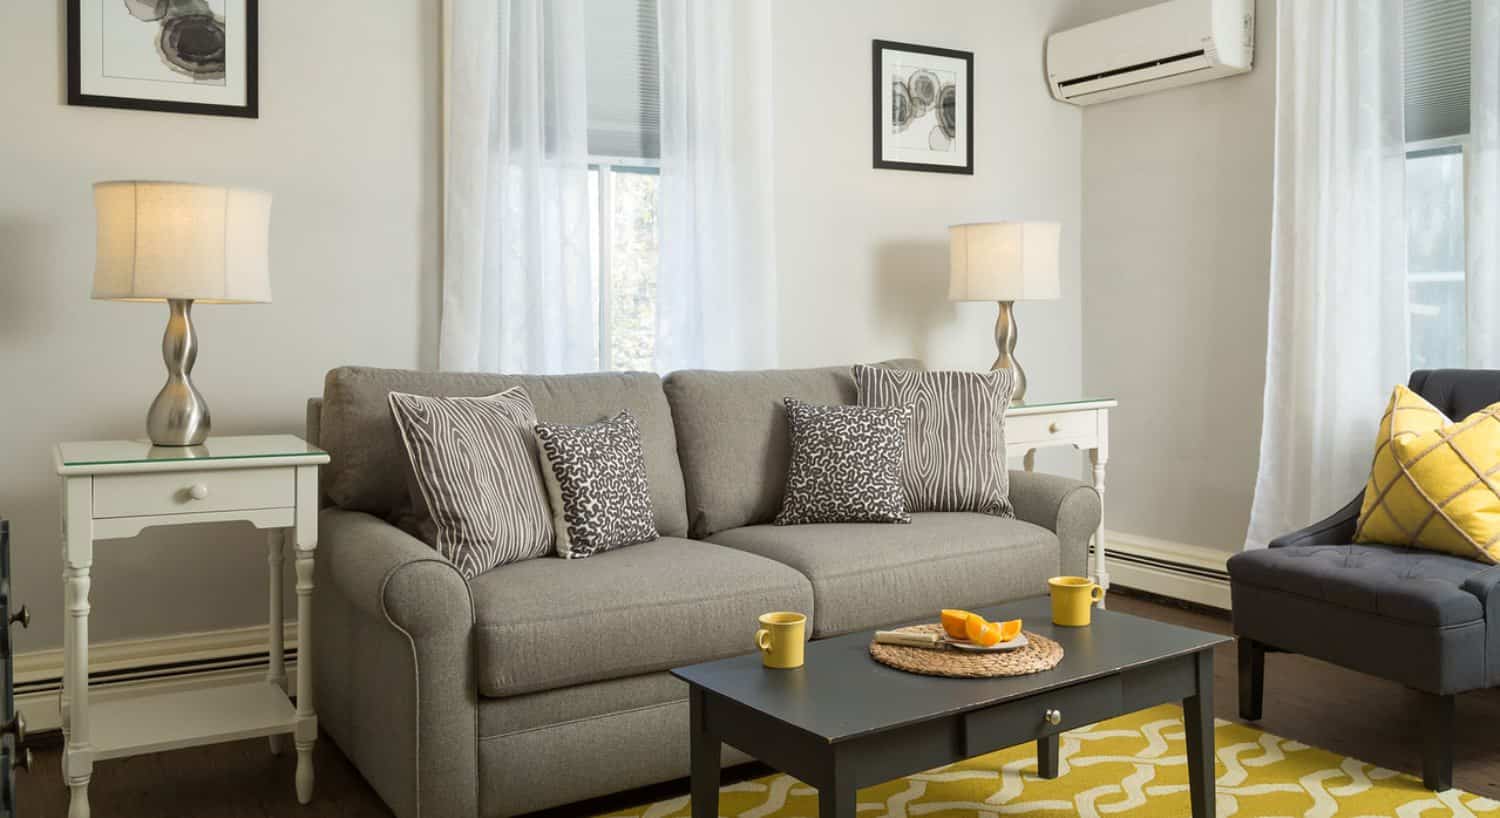 Sitting area with gray upholstered coach, gray and white and yellow pillows, hardwood flooring, light walls, dark wooden coffee table and yellow and white area rug